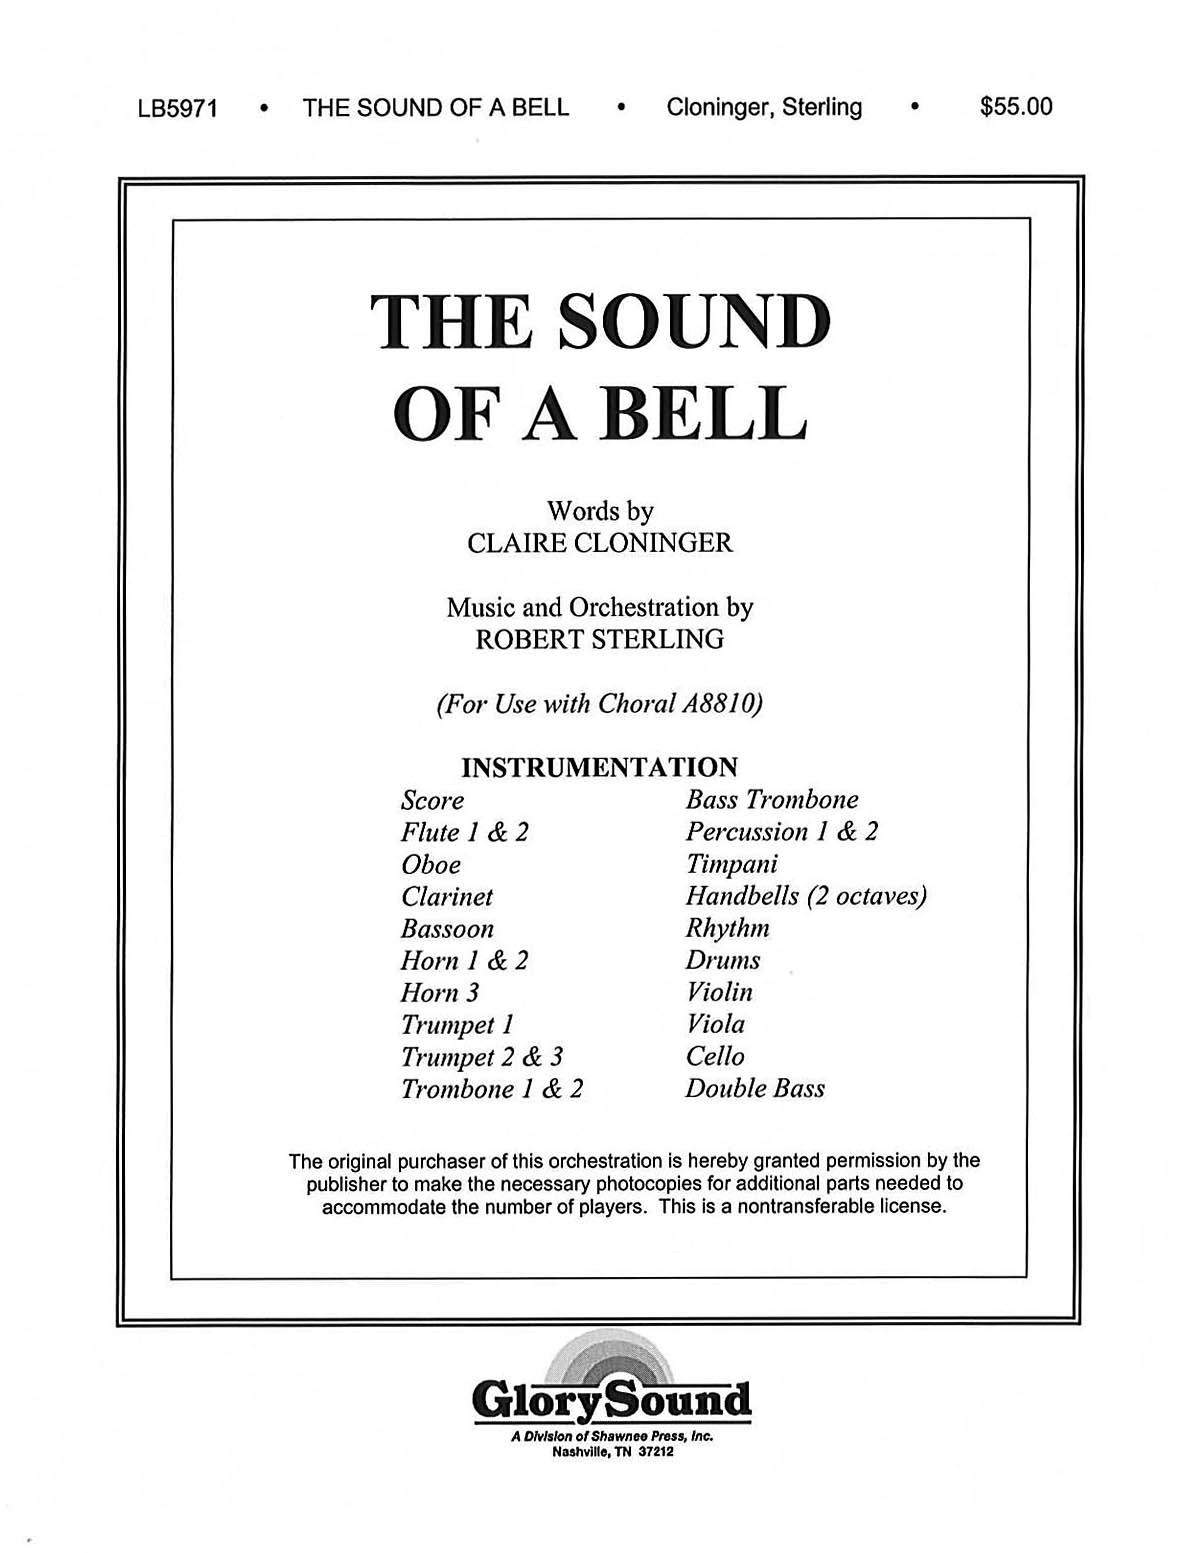 The Sound of a Bell: Orchestra: Parts